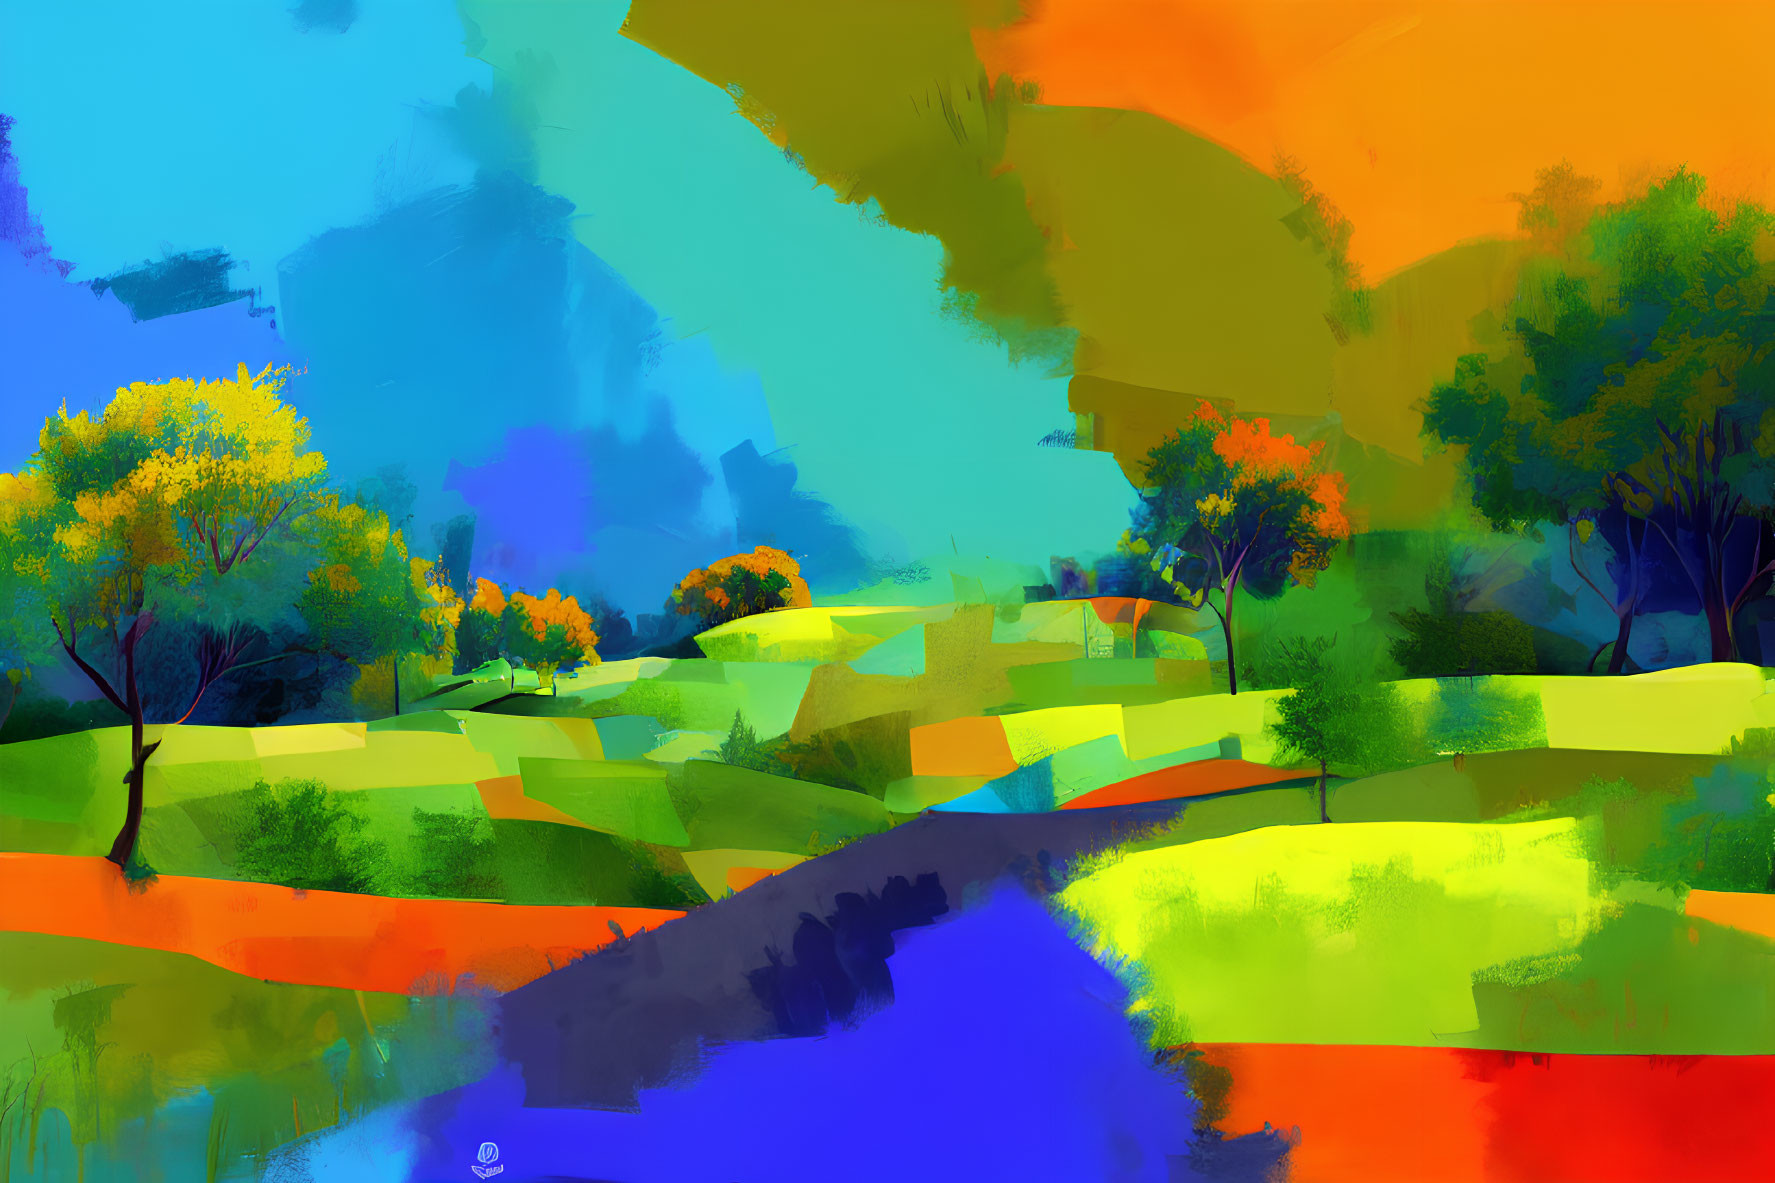 Colorful Abstract Landscape with Trees, Hills, and River